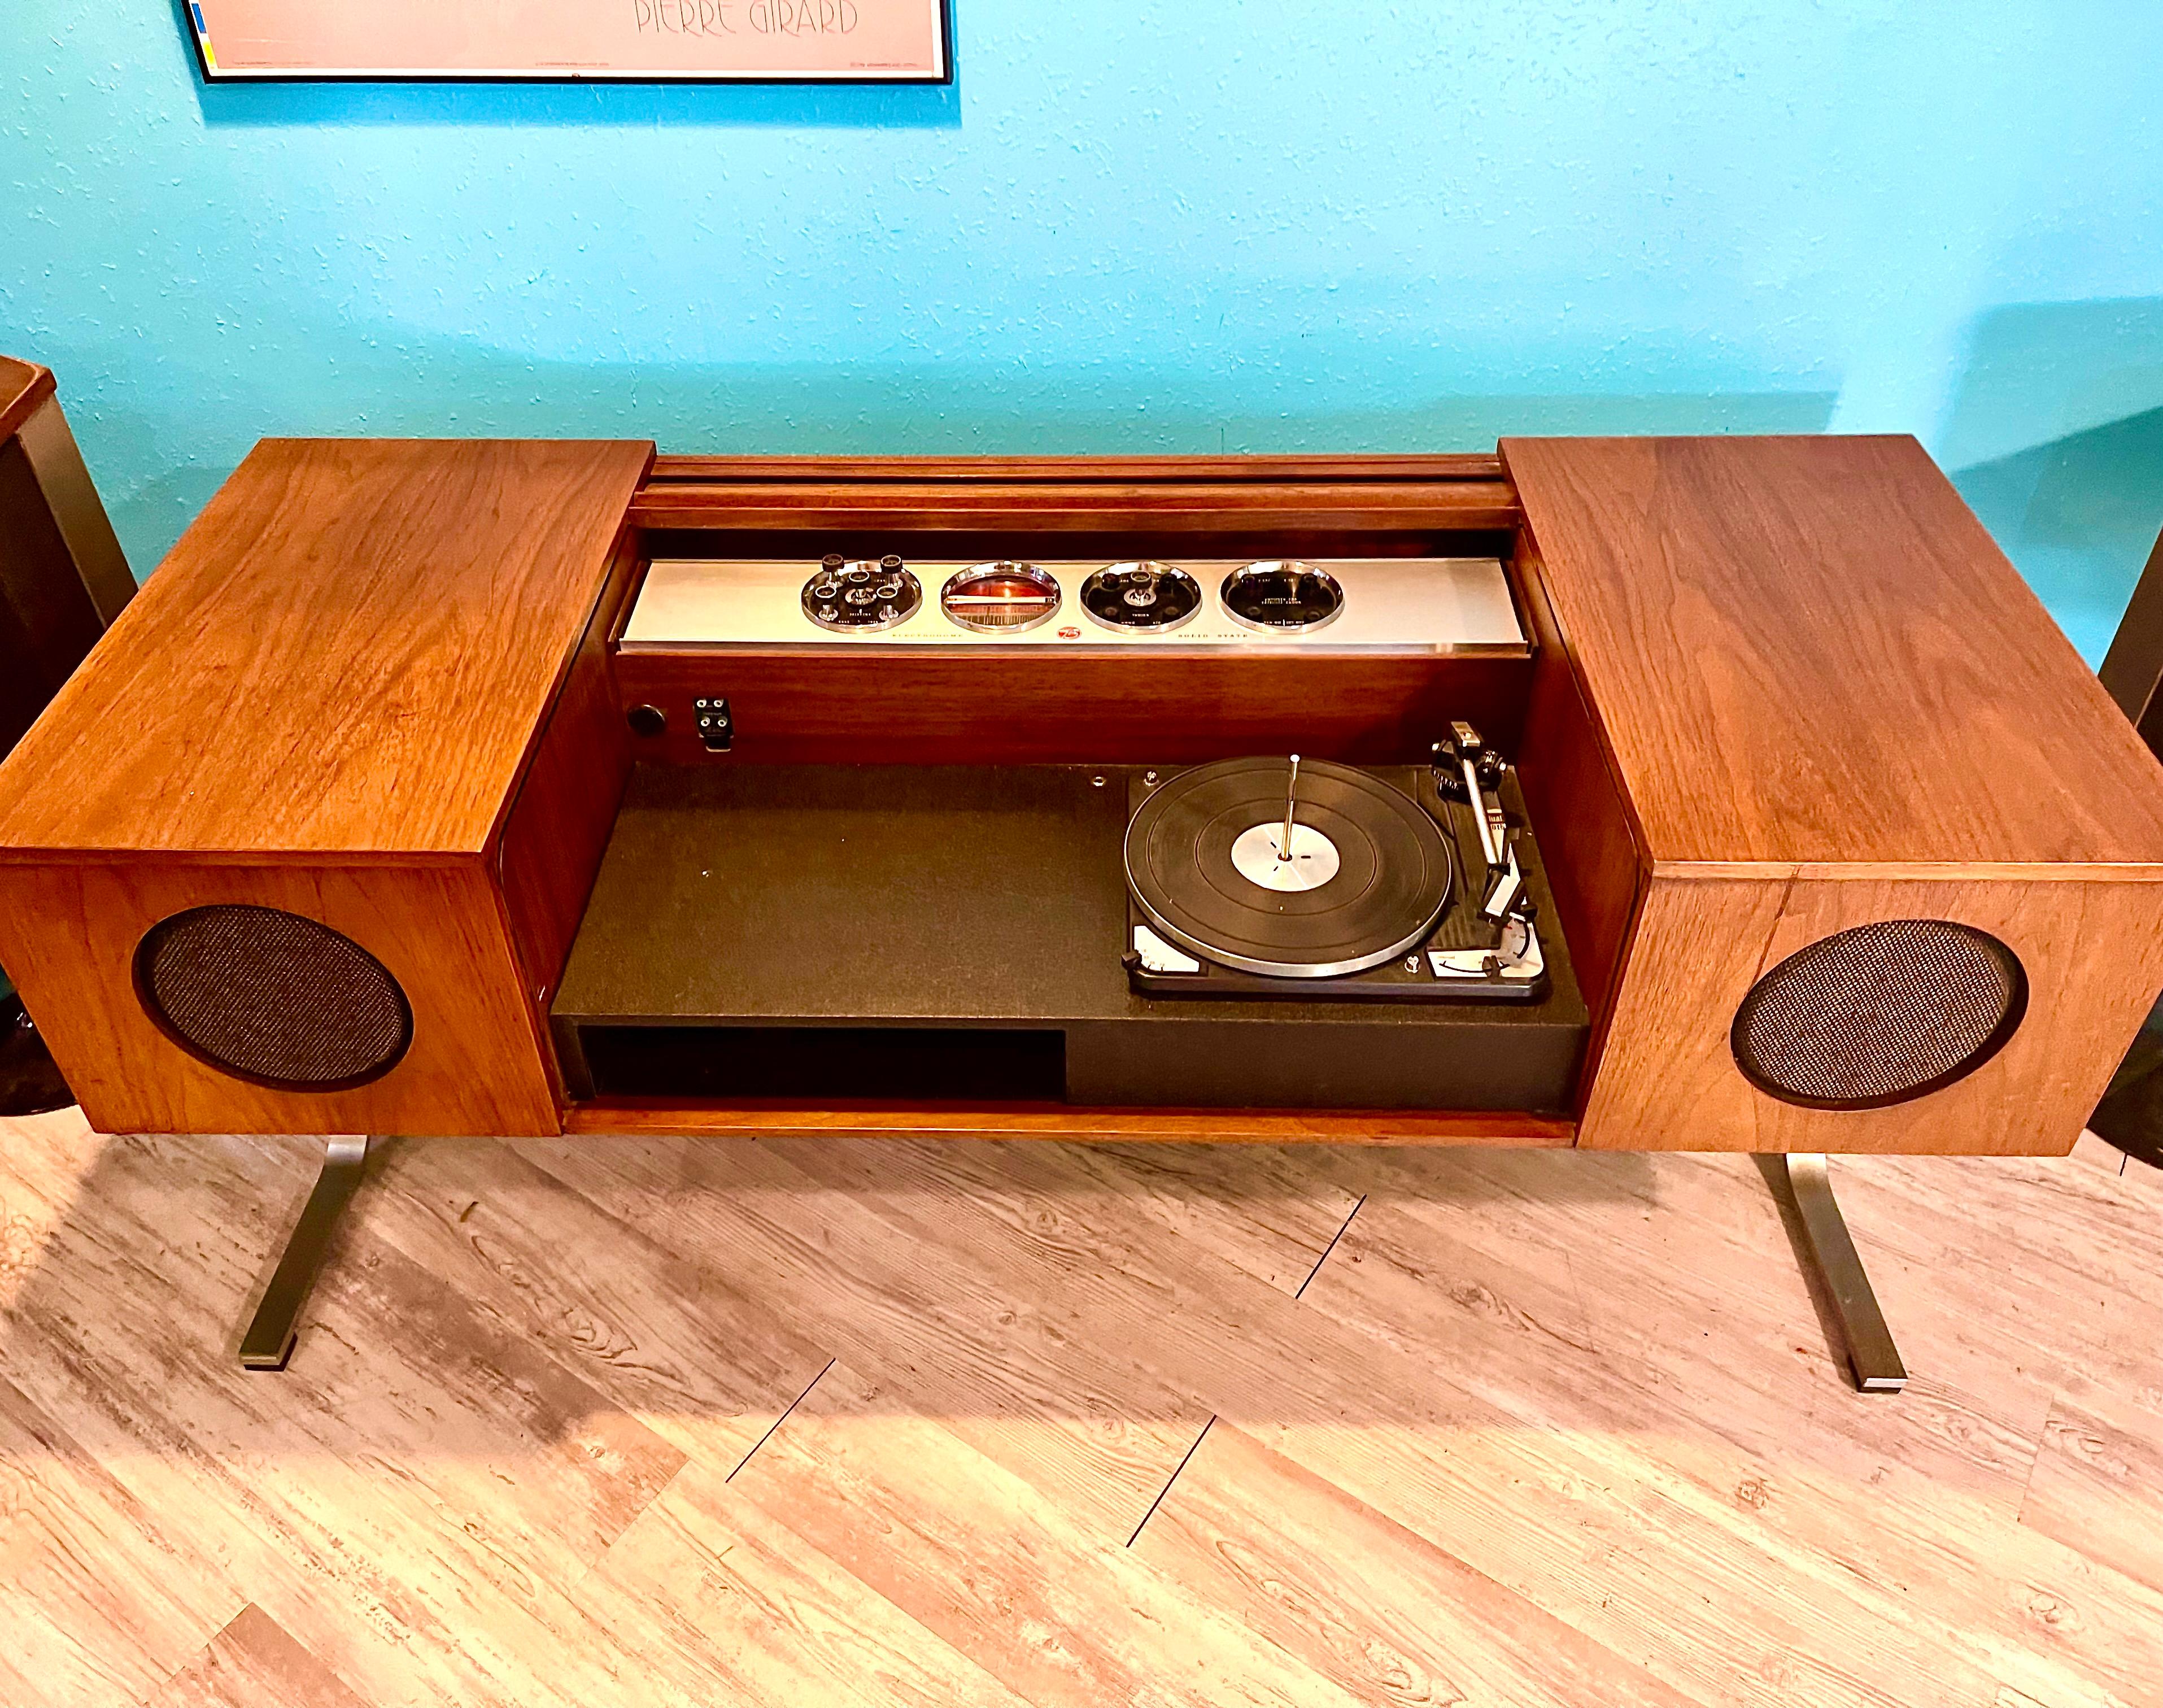 Canadian Electrohome 701 Circa 75 stereo console radio record player (eames baughman lk) For Sale